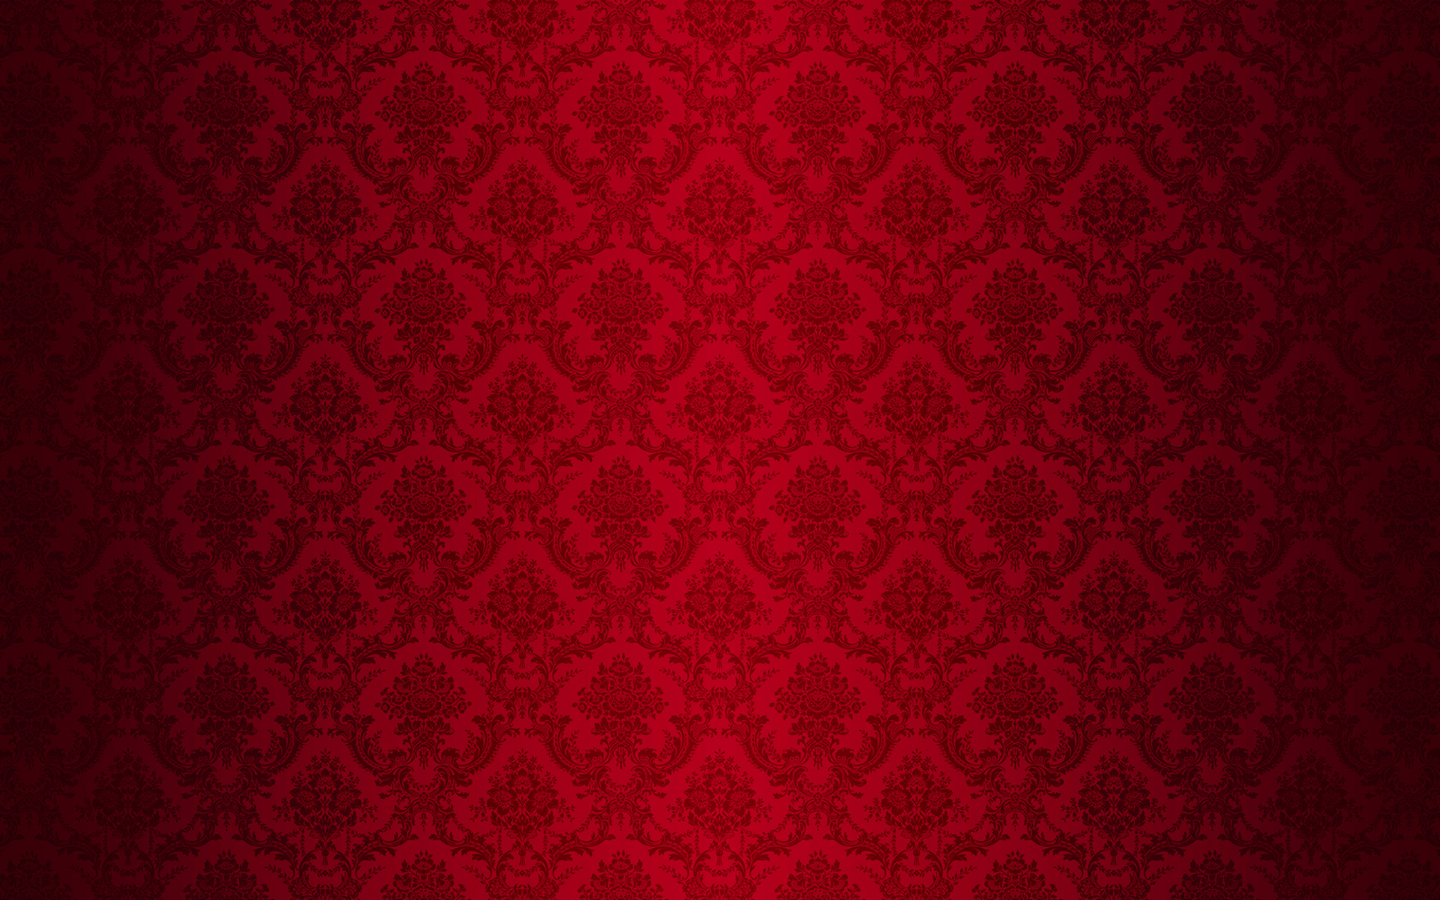 Red And White Damask Wallpaper